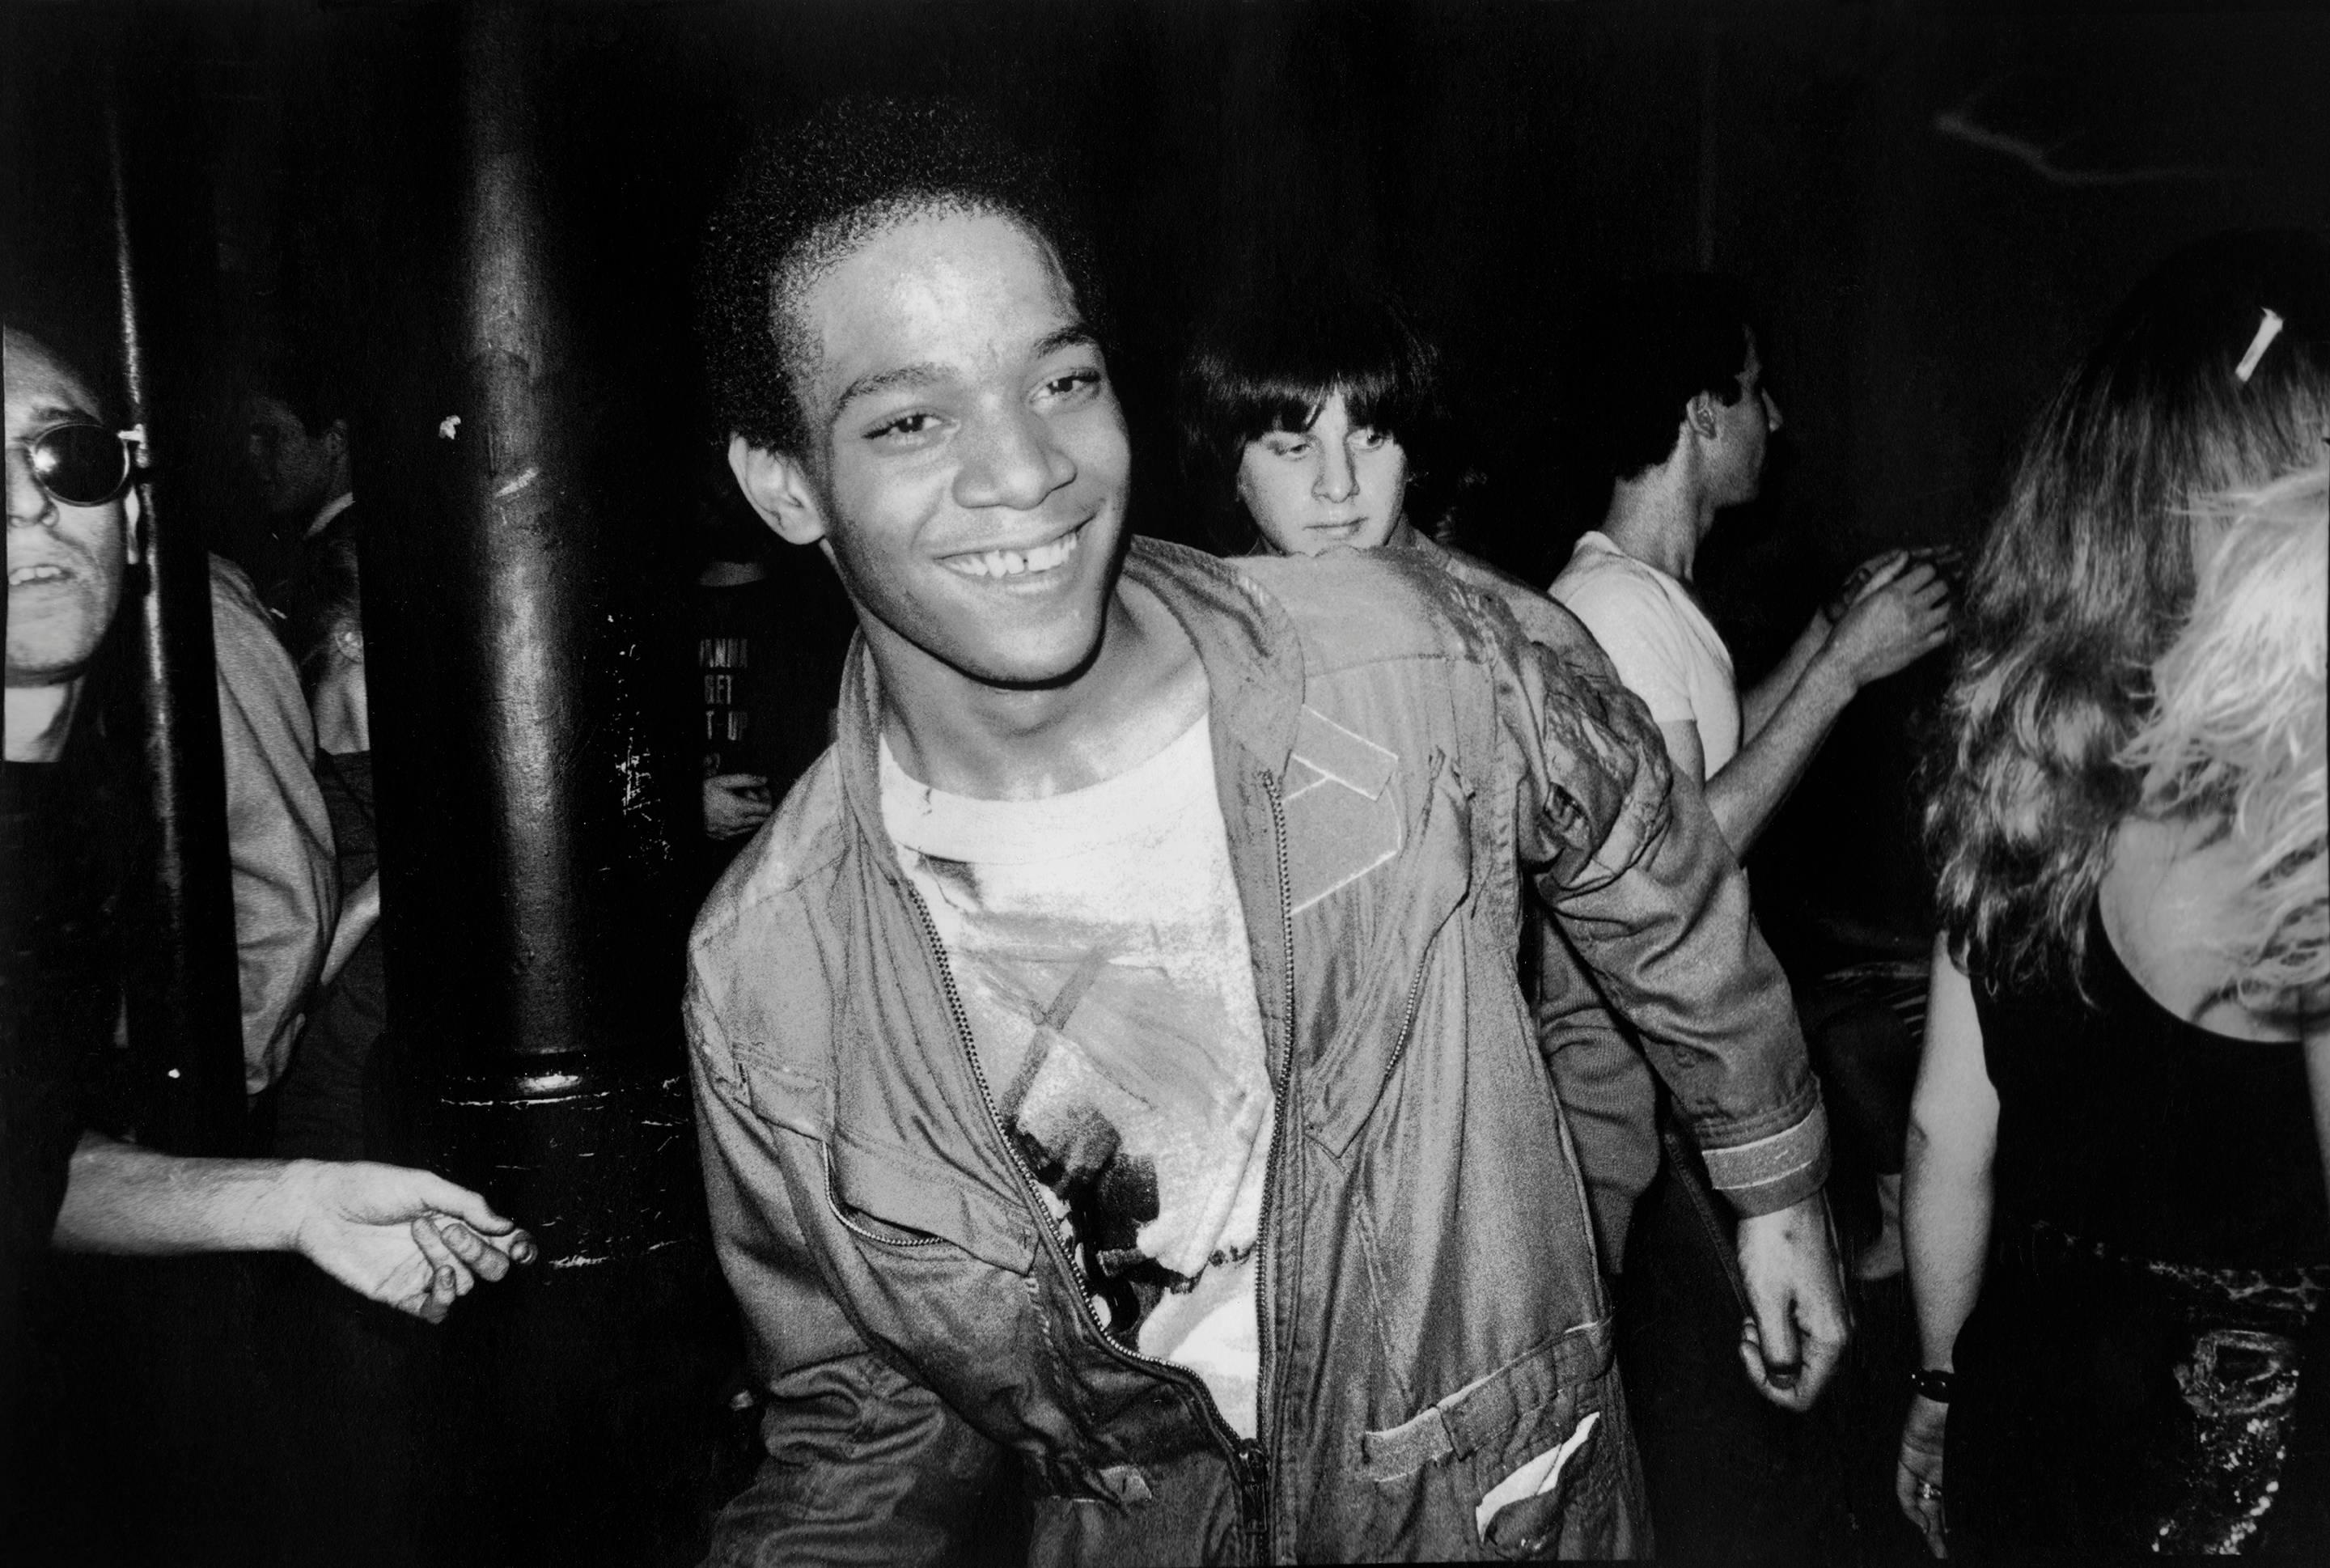 Nicholas Taylor Black and White Photograph - BASQUIAT Dancing at The Mudd Club, 1979 (Basquiat Boom For Real photograph)